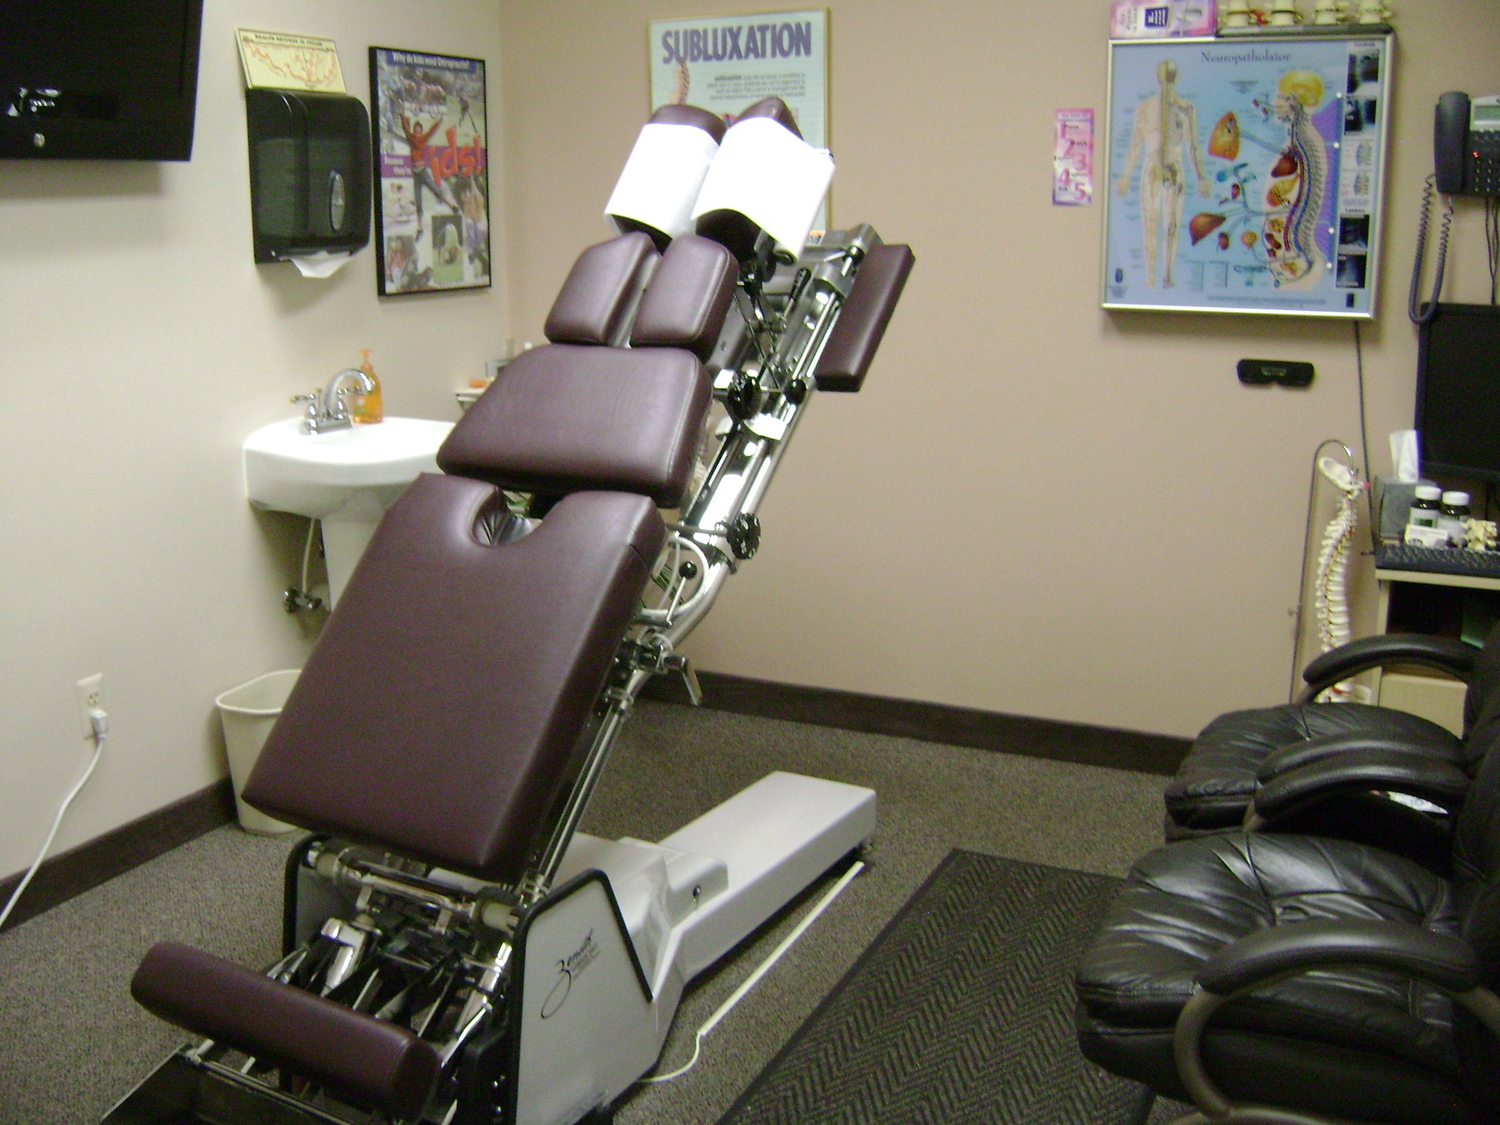 Gallery Photo of Spinal Adjustment Room.  The thompsom Tables has sections which shift to reduce the Spinal Subluxations in the spine.